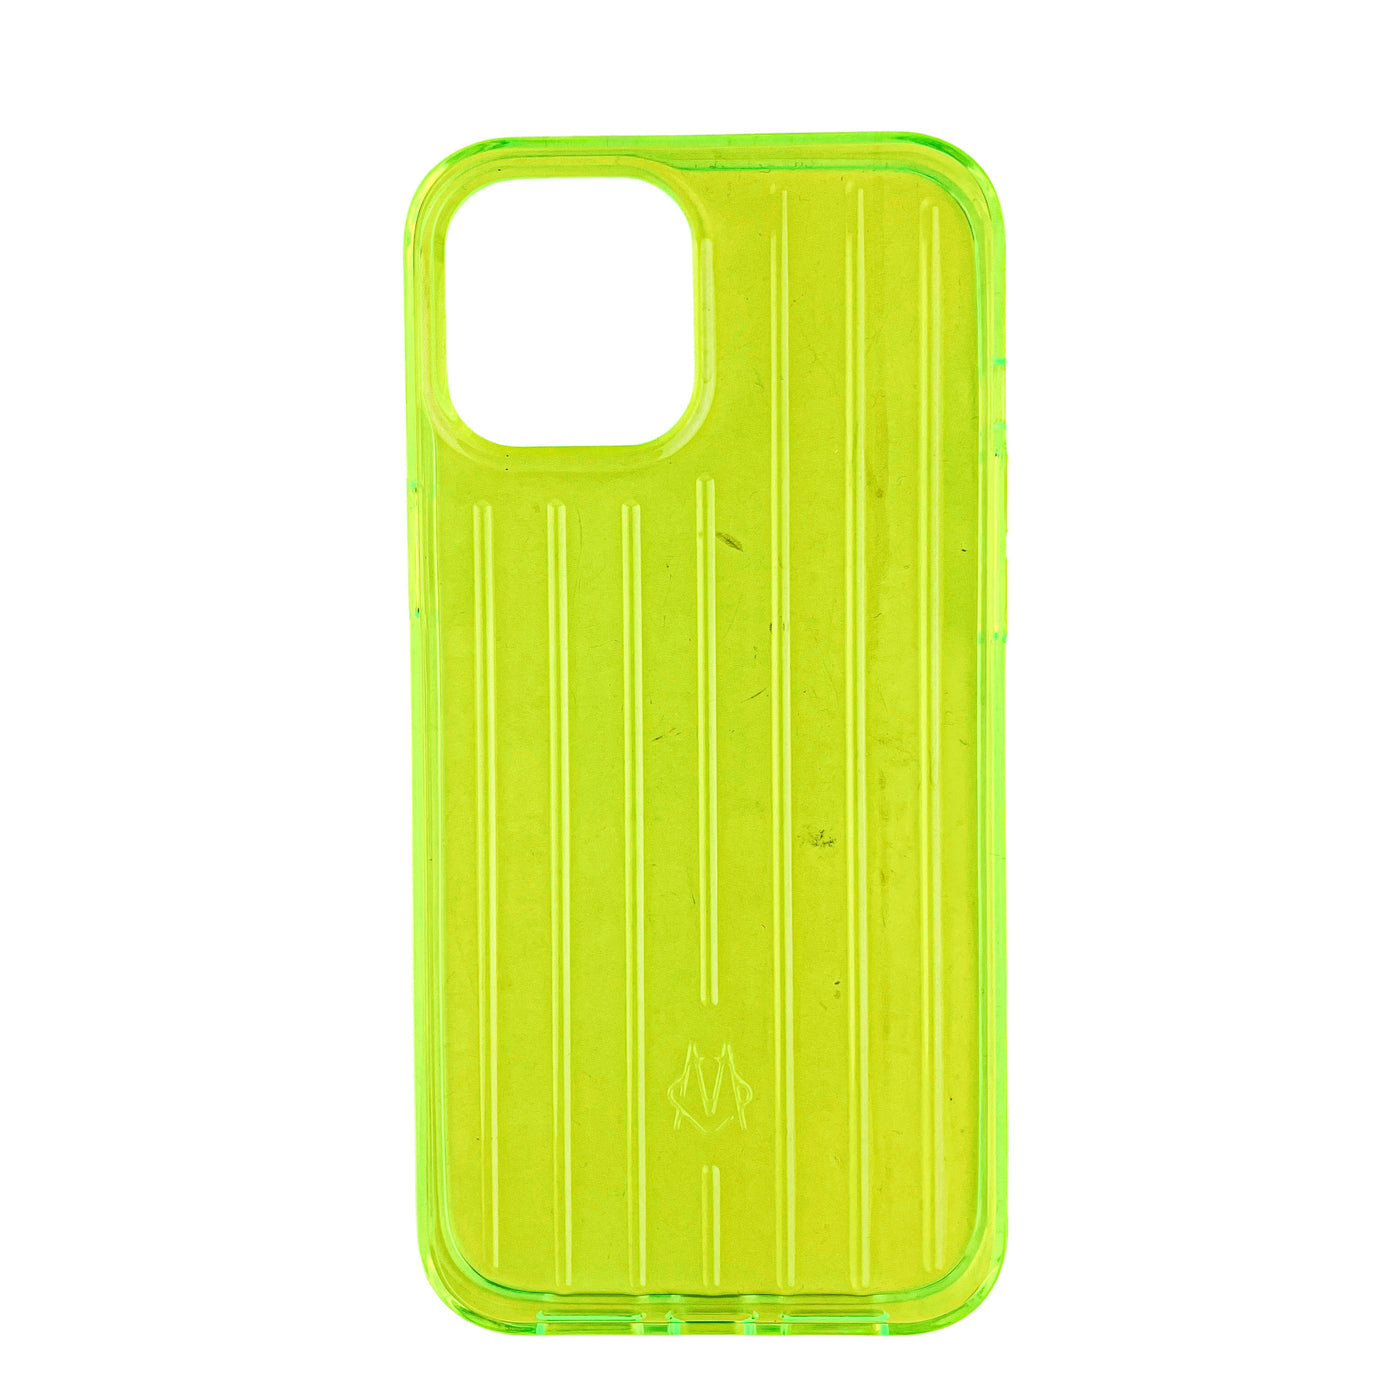 RIMOWA iPhone 12 Pro Max Phone Case in Fluorescent Lime - Discounts on RIMOWA at UAL